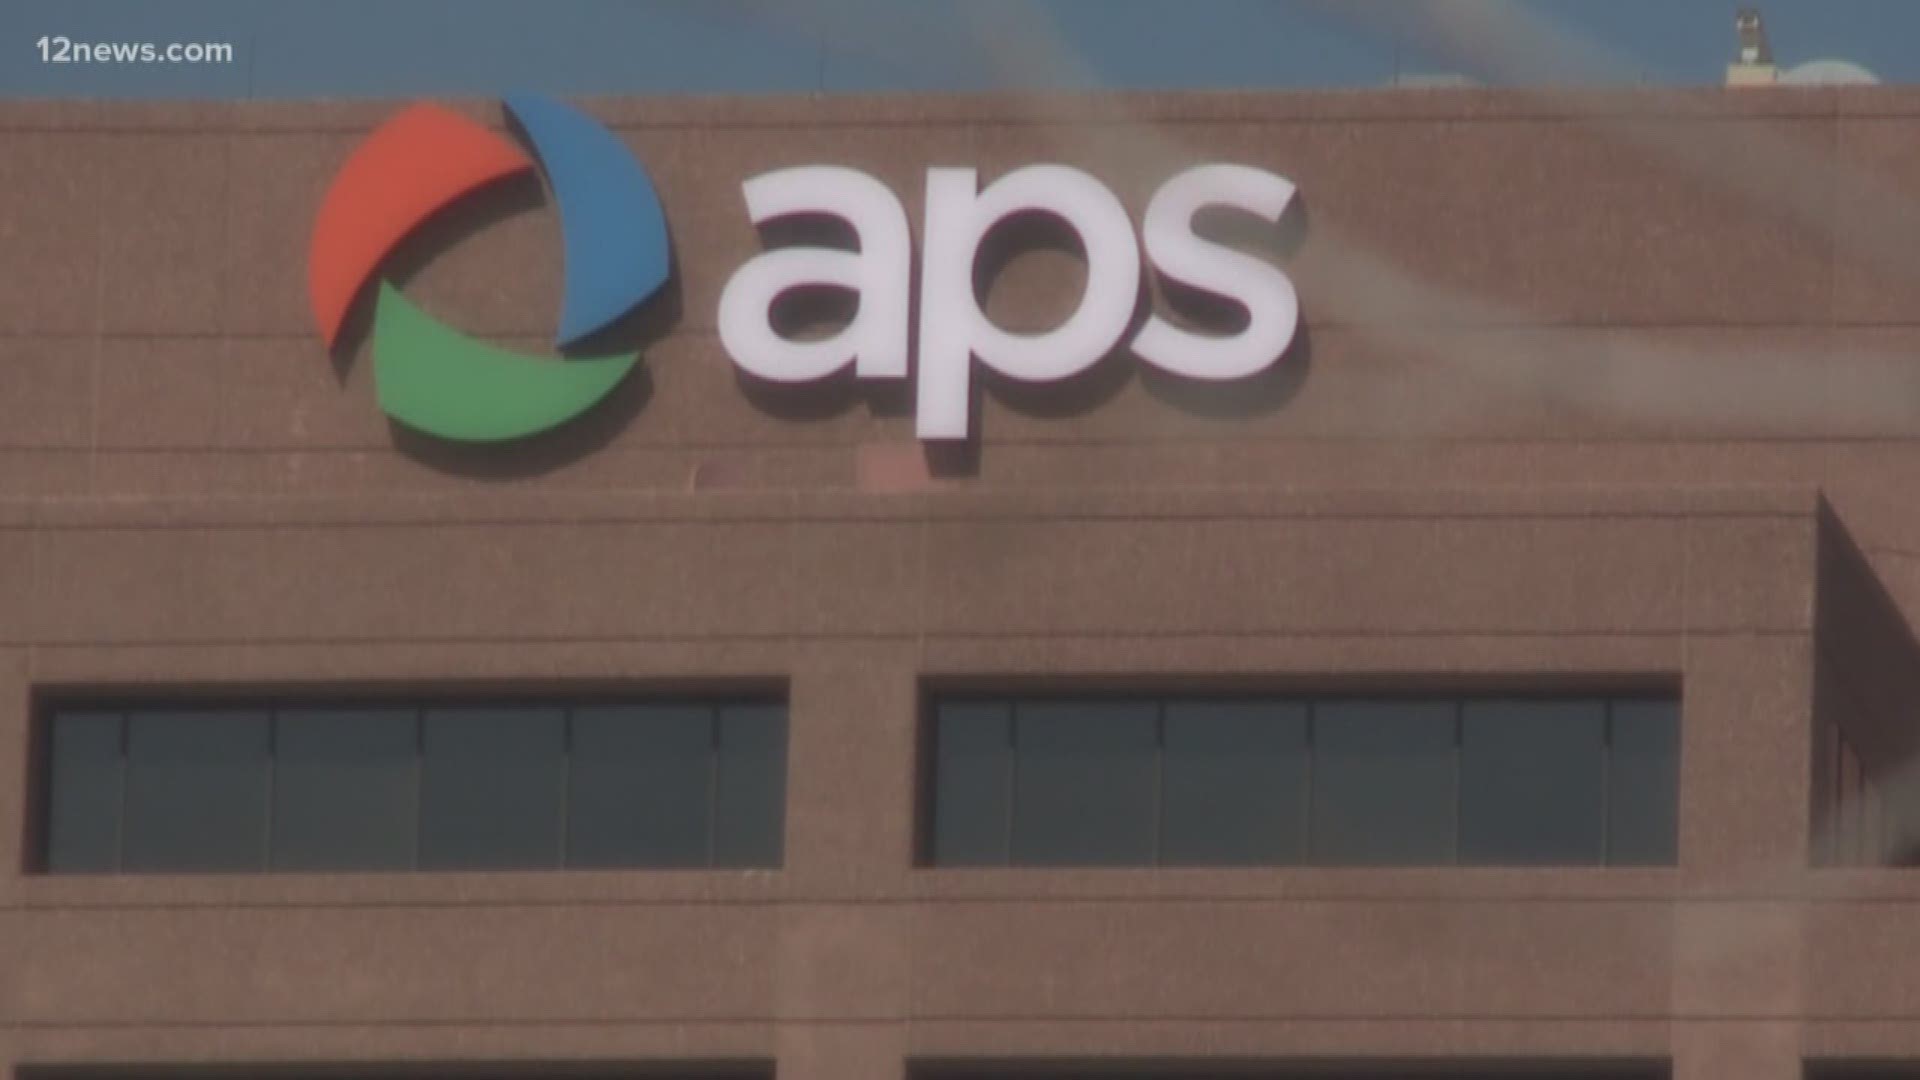 APS says that in June of last year a customer's power was shut off because she didn't pay her bill. Her body was discovered in July. This is the second death of an APS customer in 2018 because their power was shut off. APS and all utilities regulated by the commission are now under a moratorium to not shut off the power of any customers until October 15th.